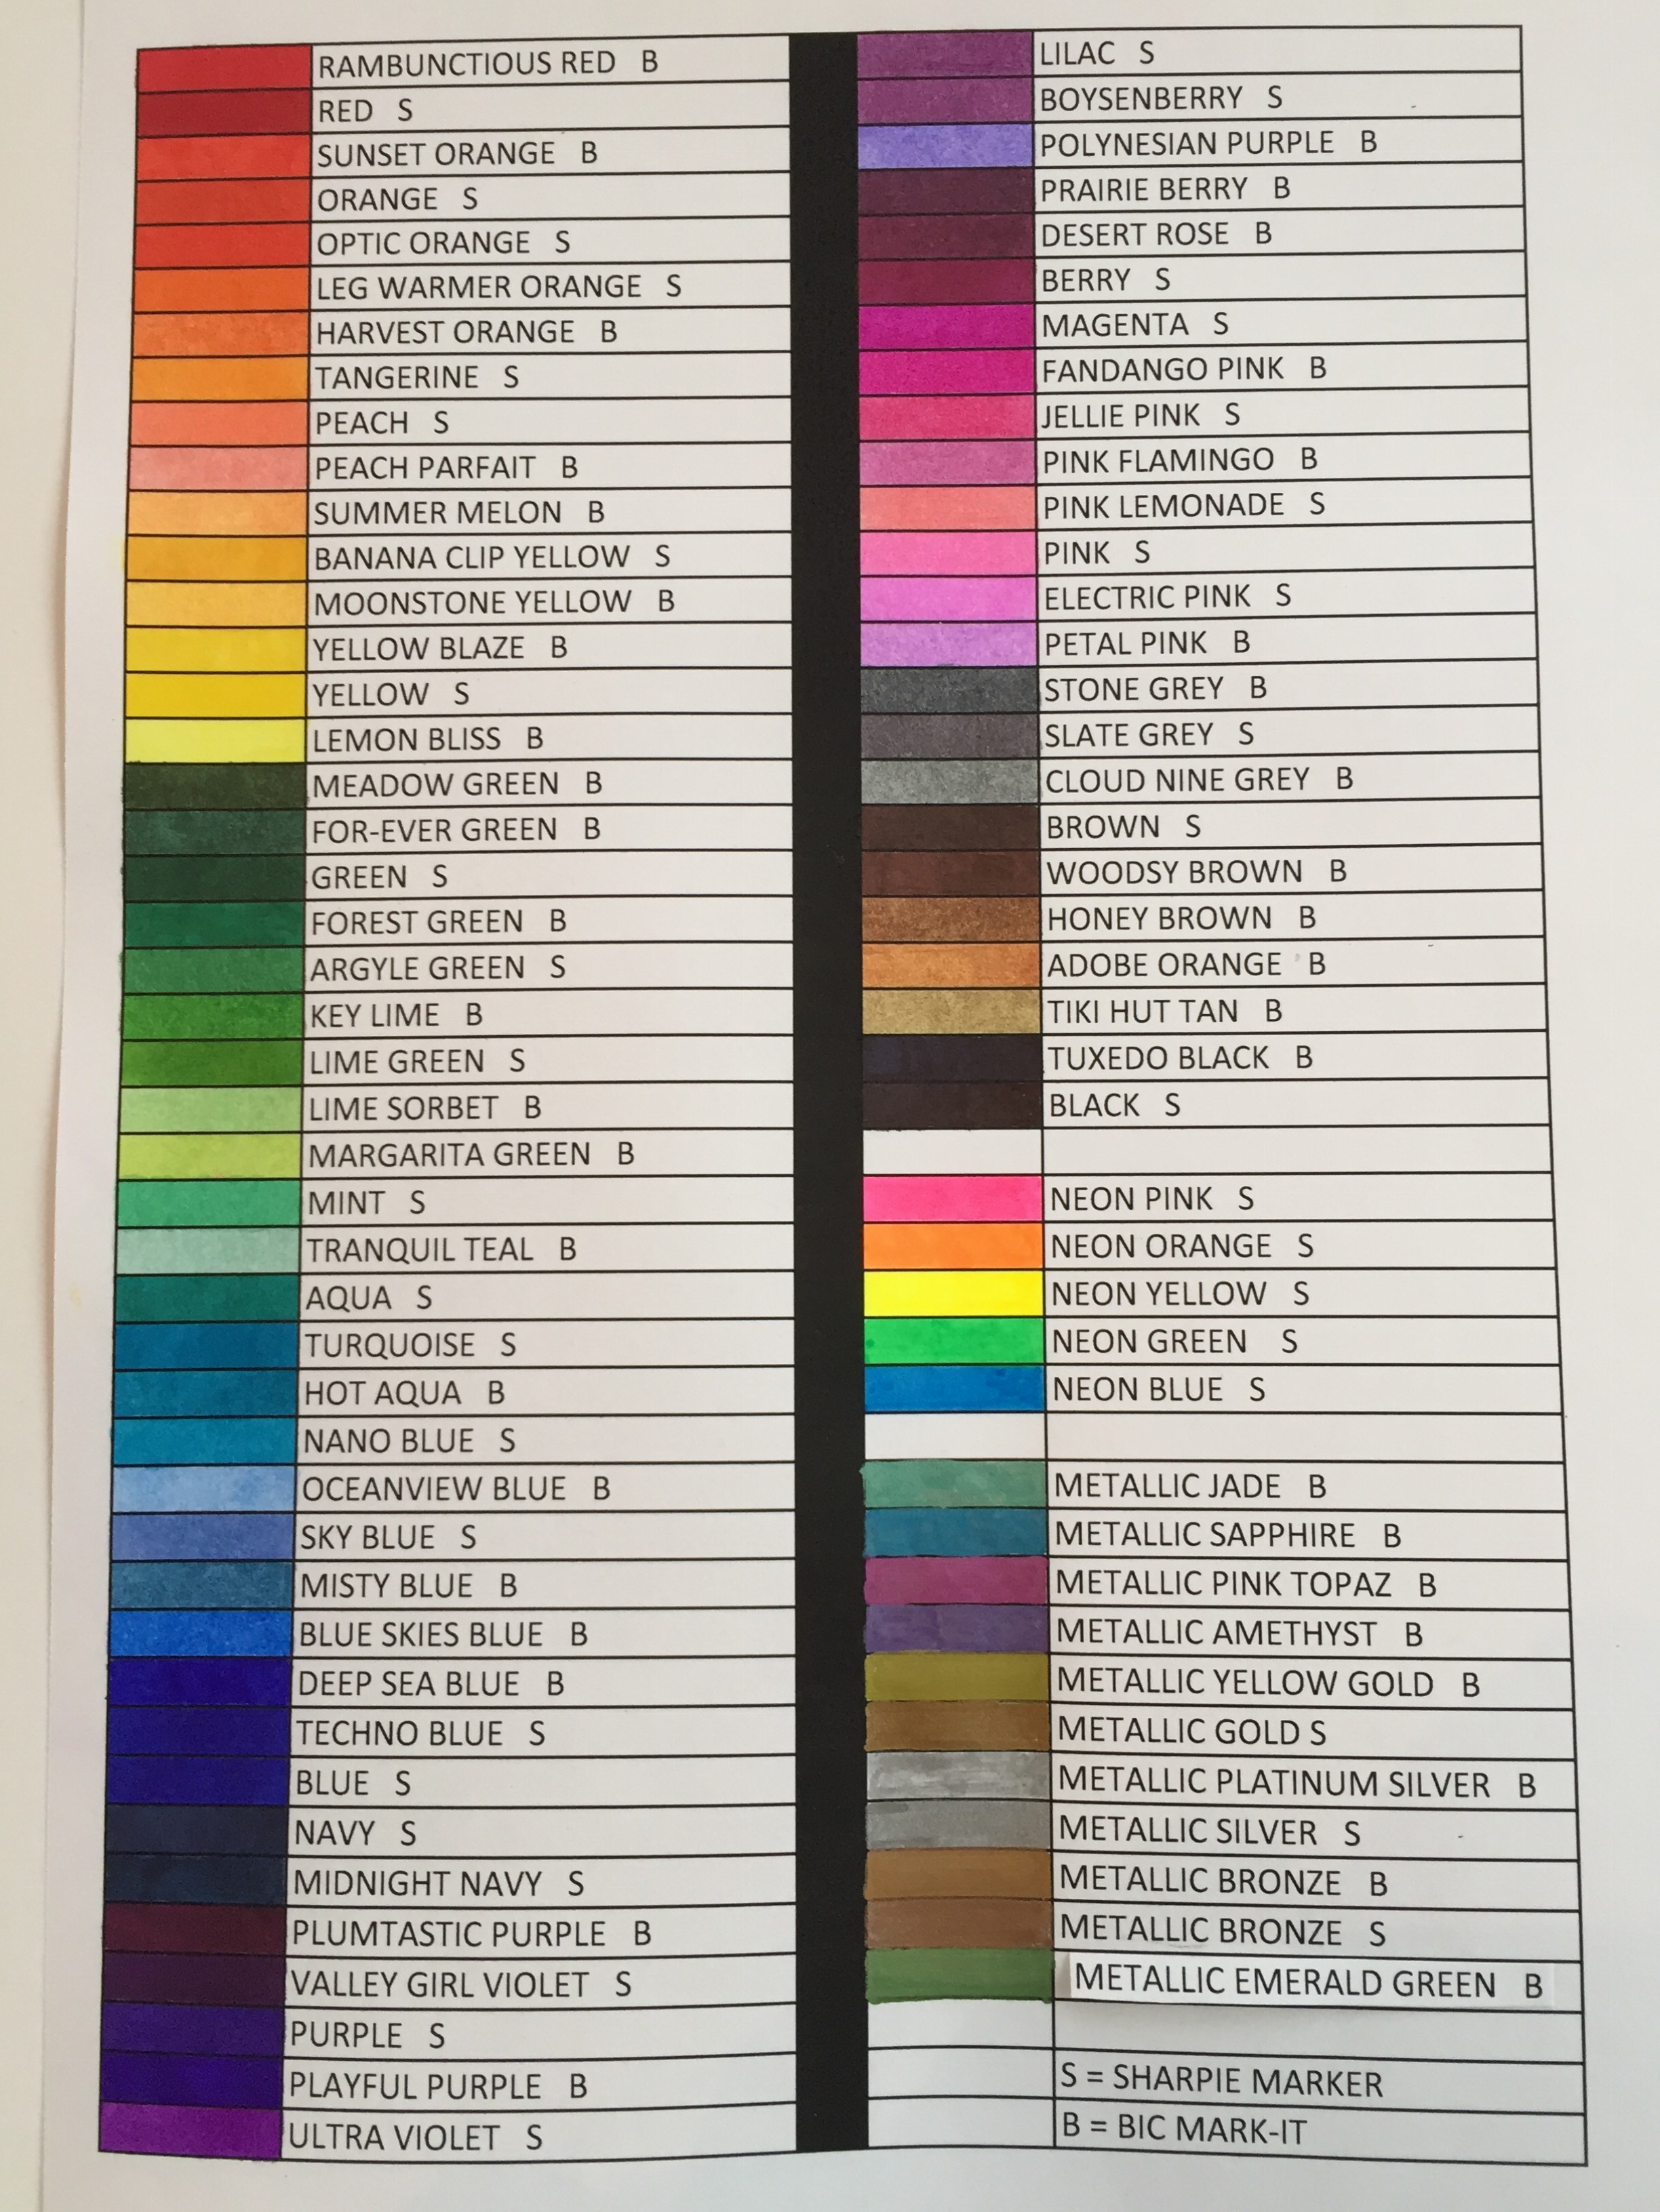 Color Chart For Sharpie and Bic MarkIt Markers